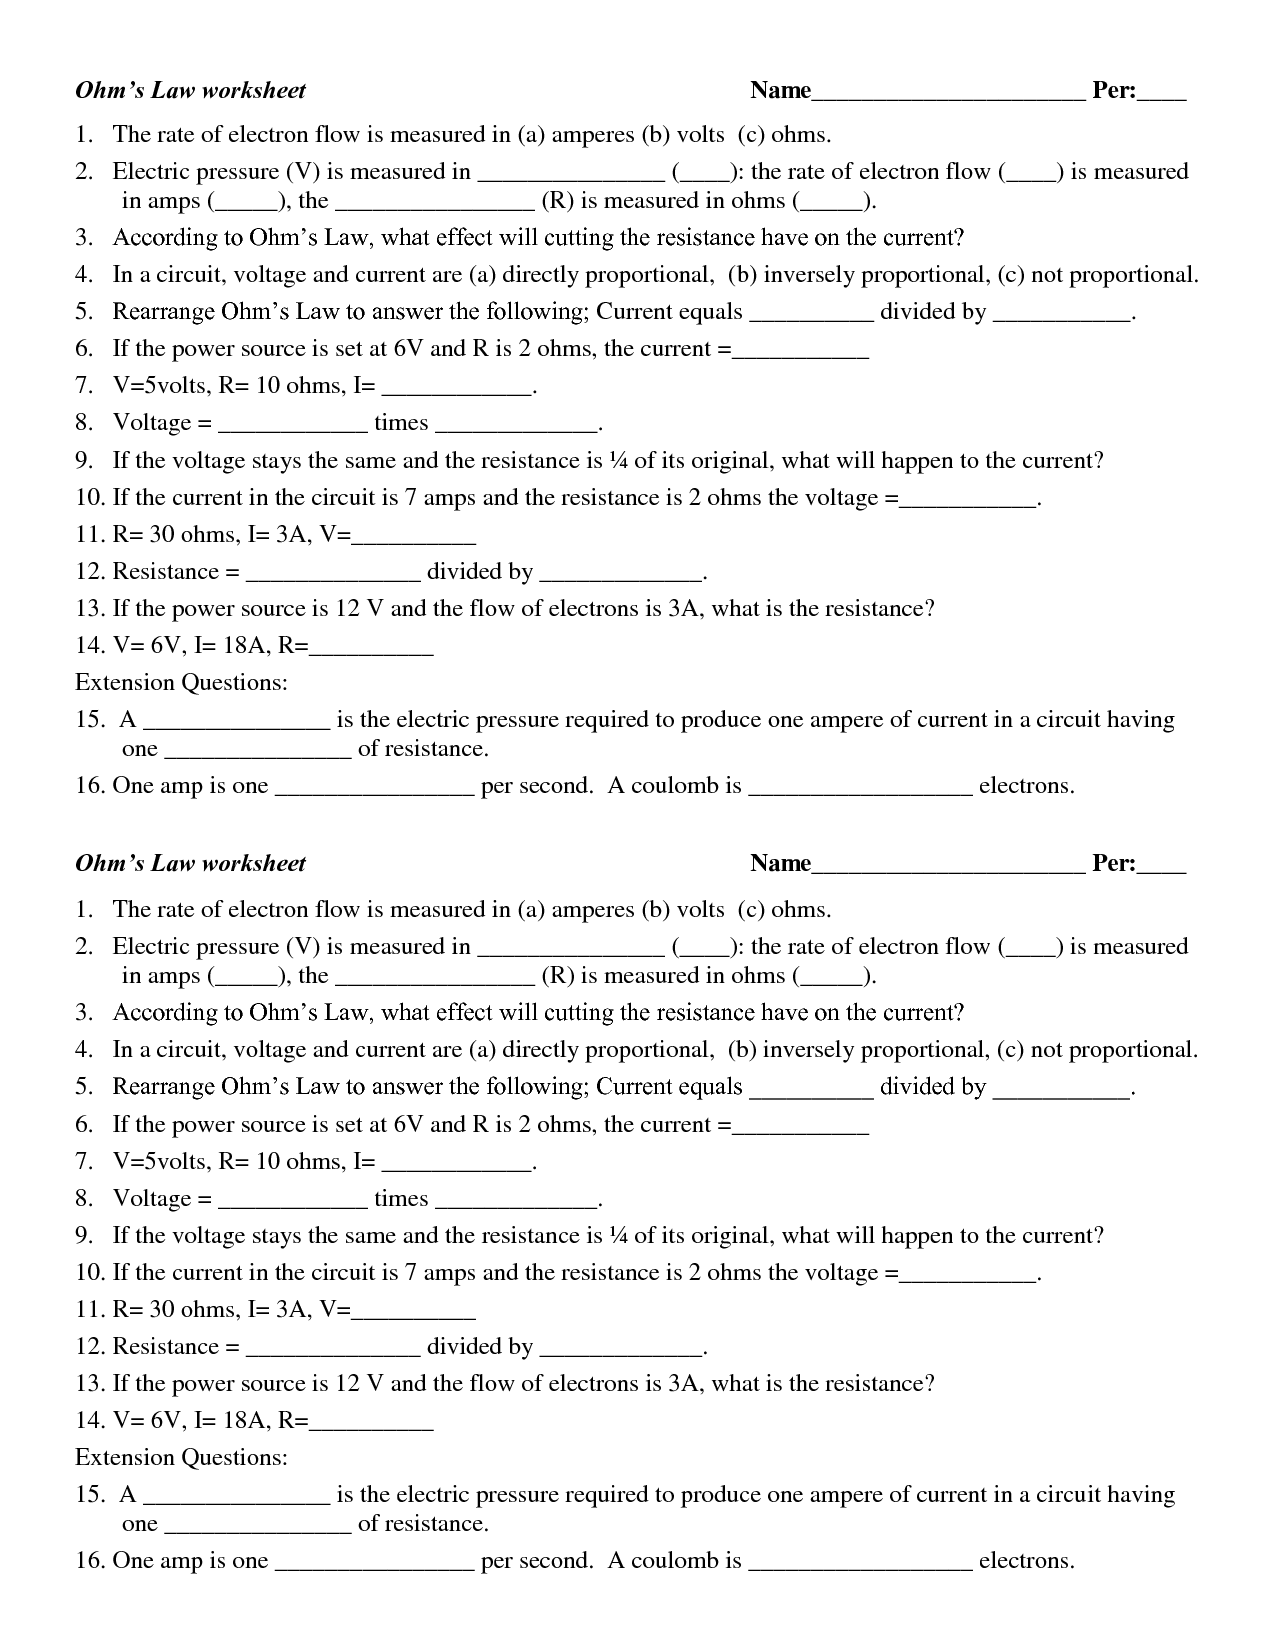 19 Best Images Of Which Law Worksheet Answers Gas Laws Worksheet Answer Key Ohms Law 